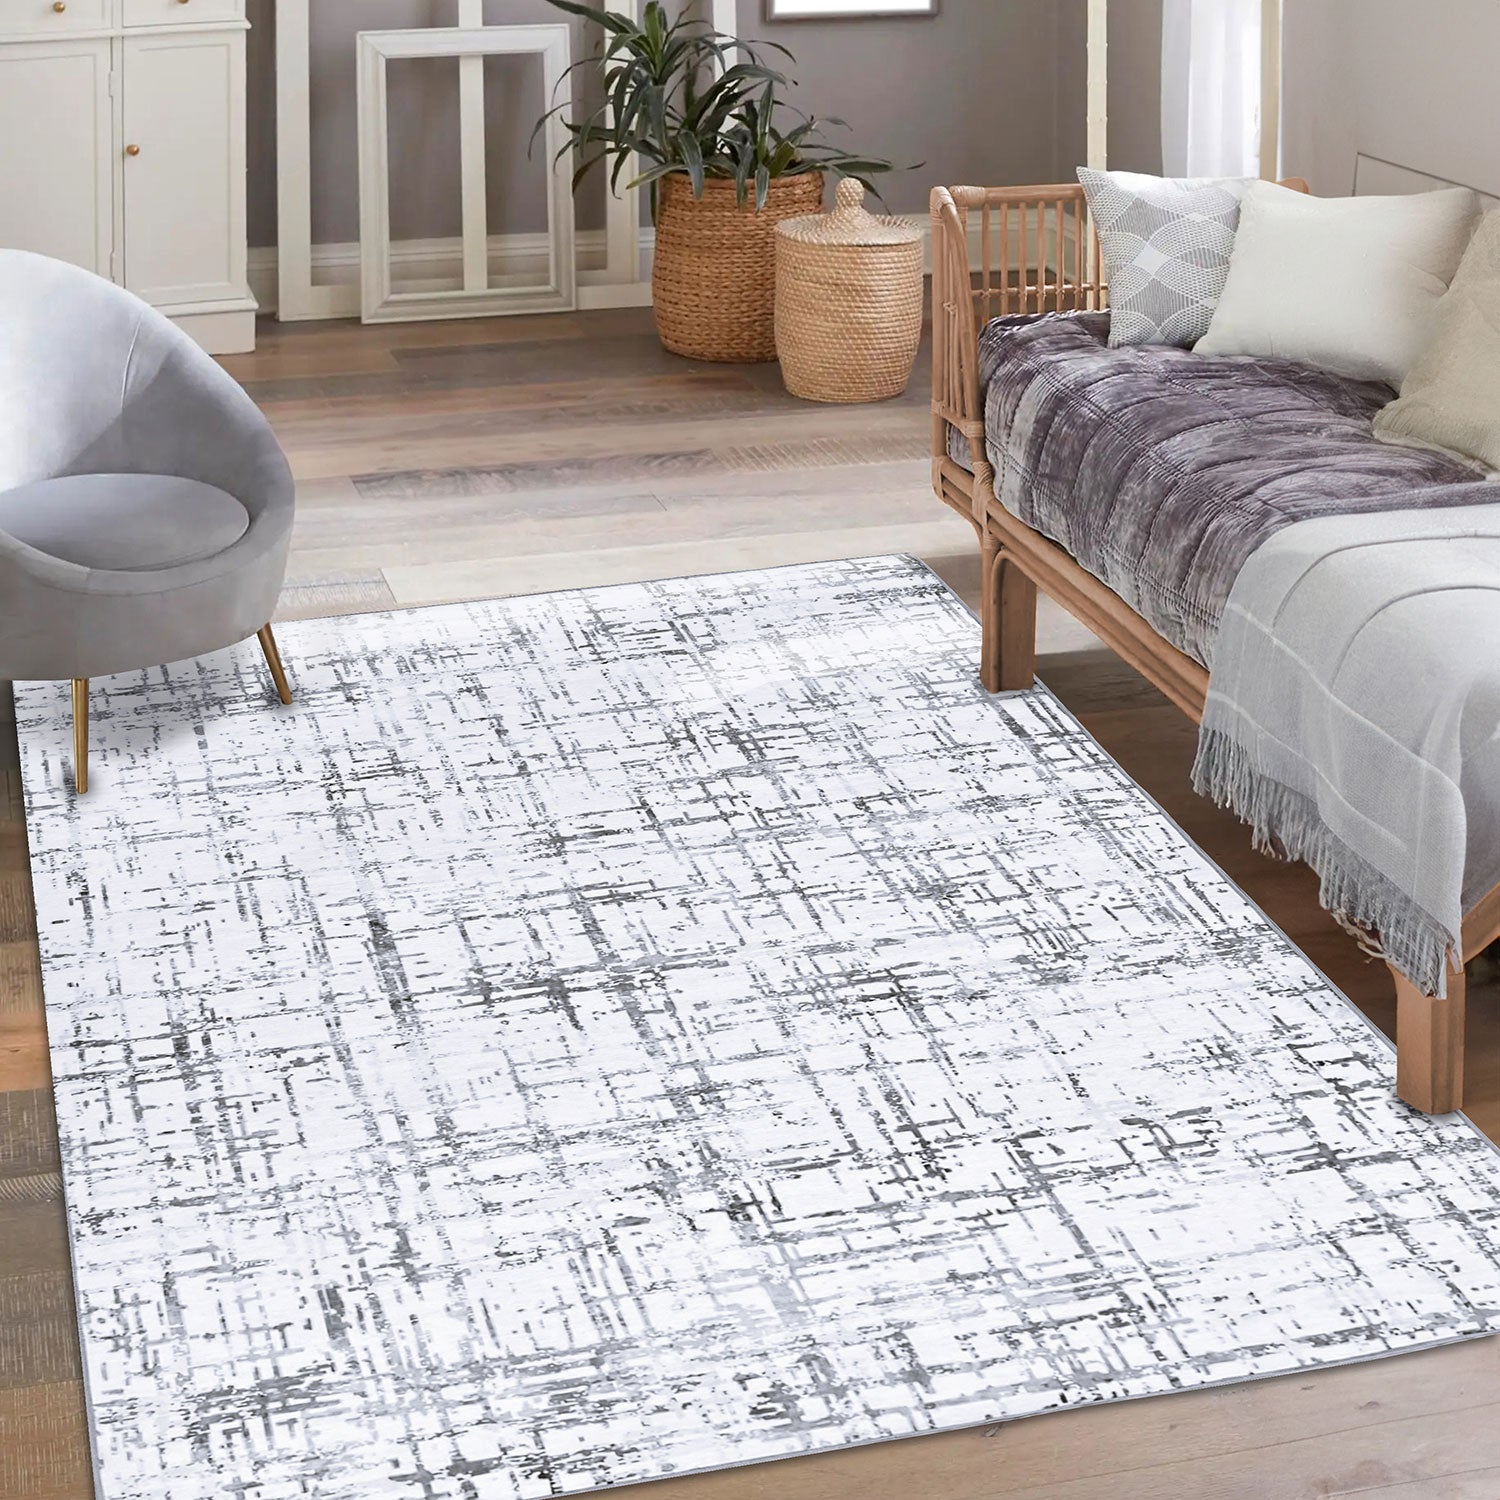 Evia Grey & White Machine Washable Rug and Runner - For Living Room, Dining Room, Bedroom, Kitchens, Kids/Nursery Room